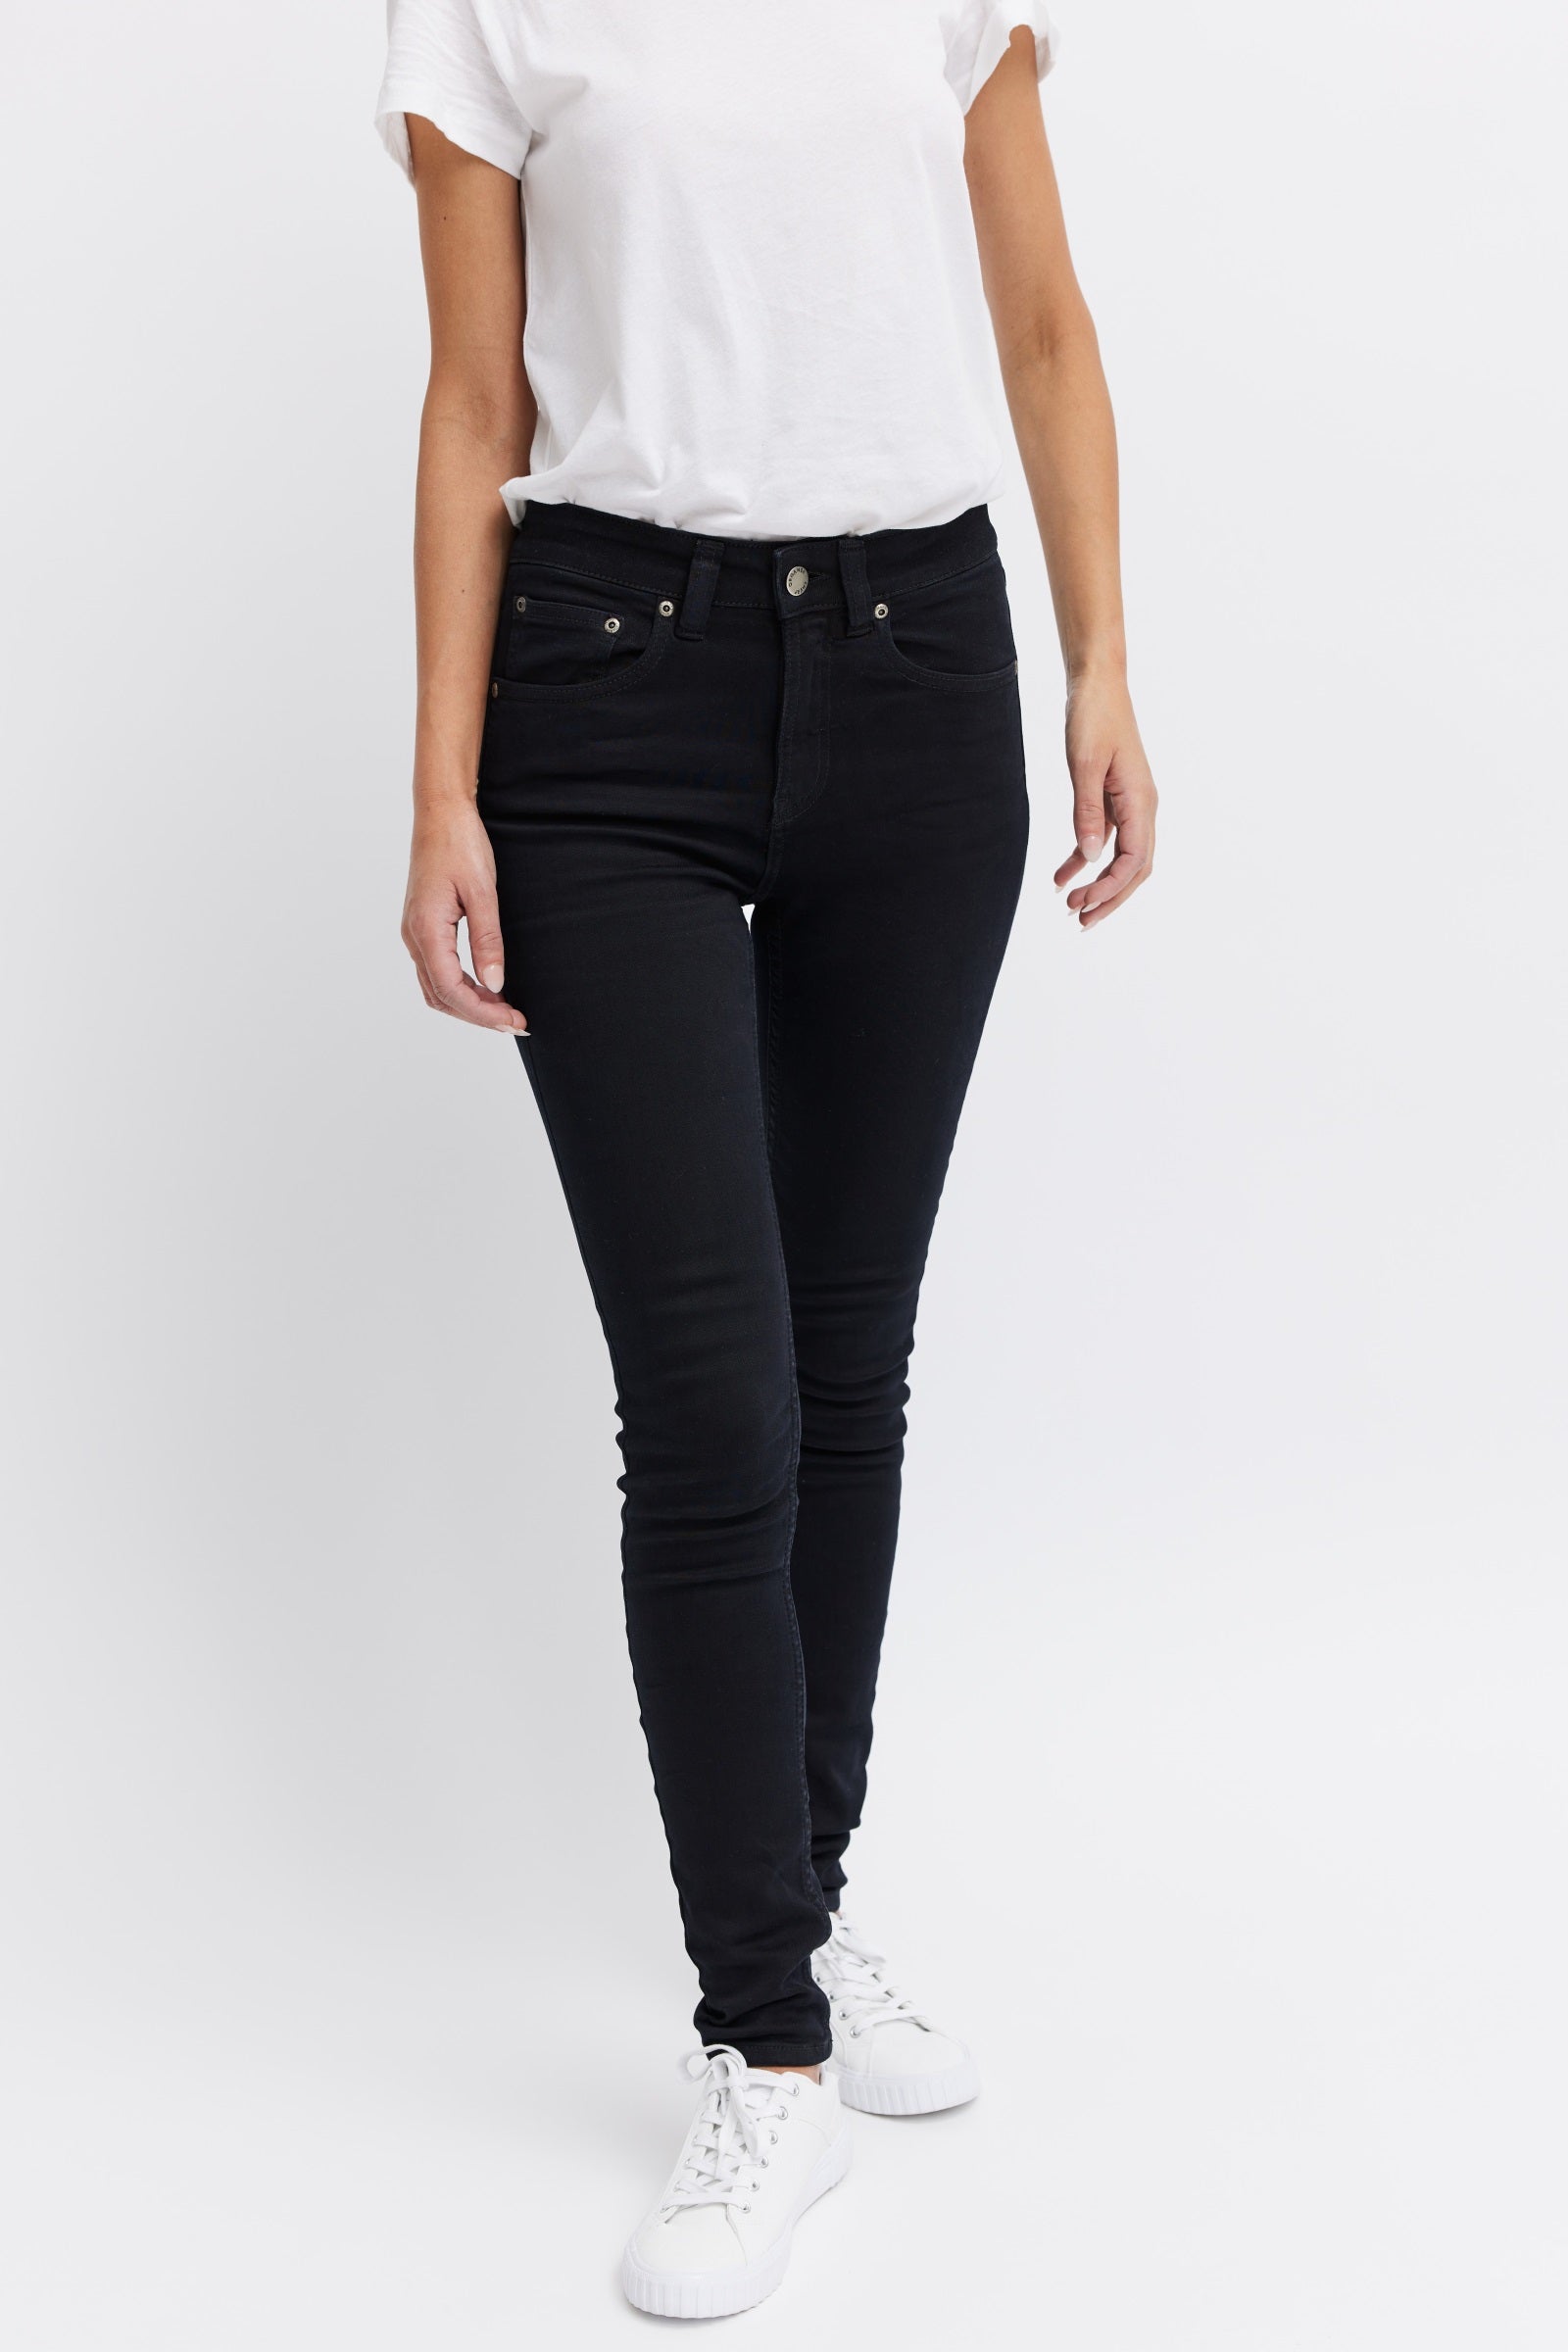 Sustainable black jeans for women - vegan, organic cotton and recycled fibers